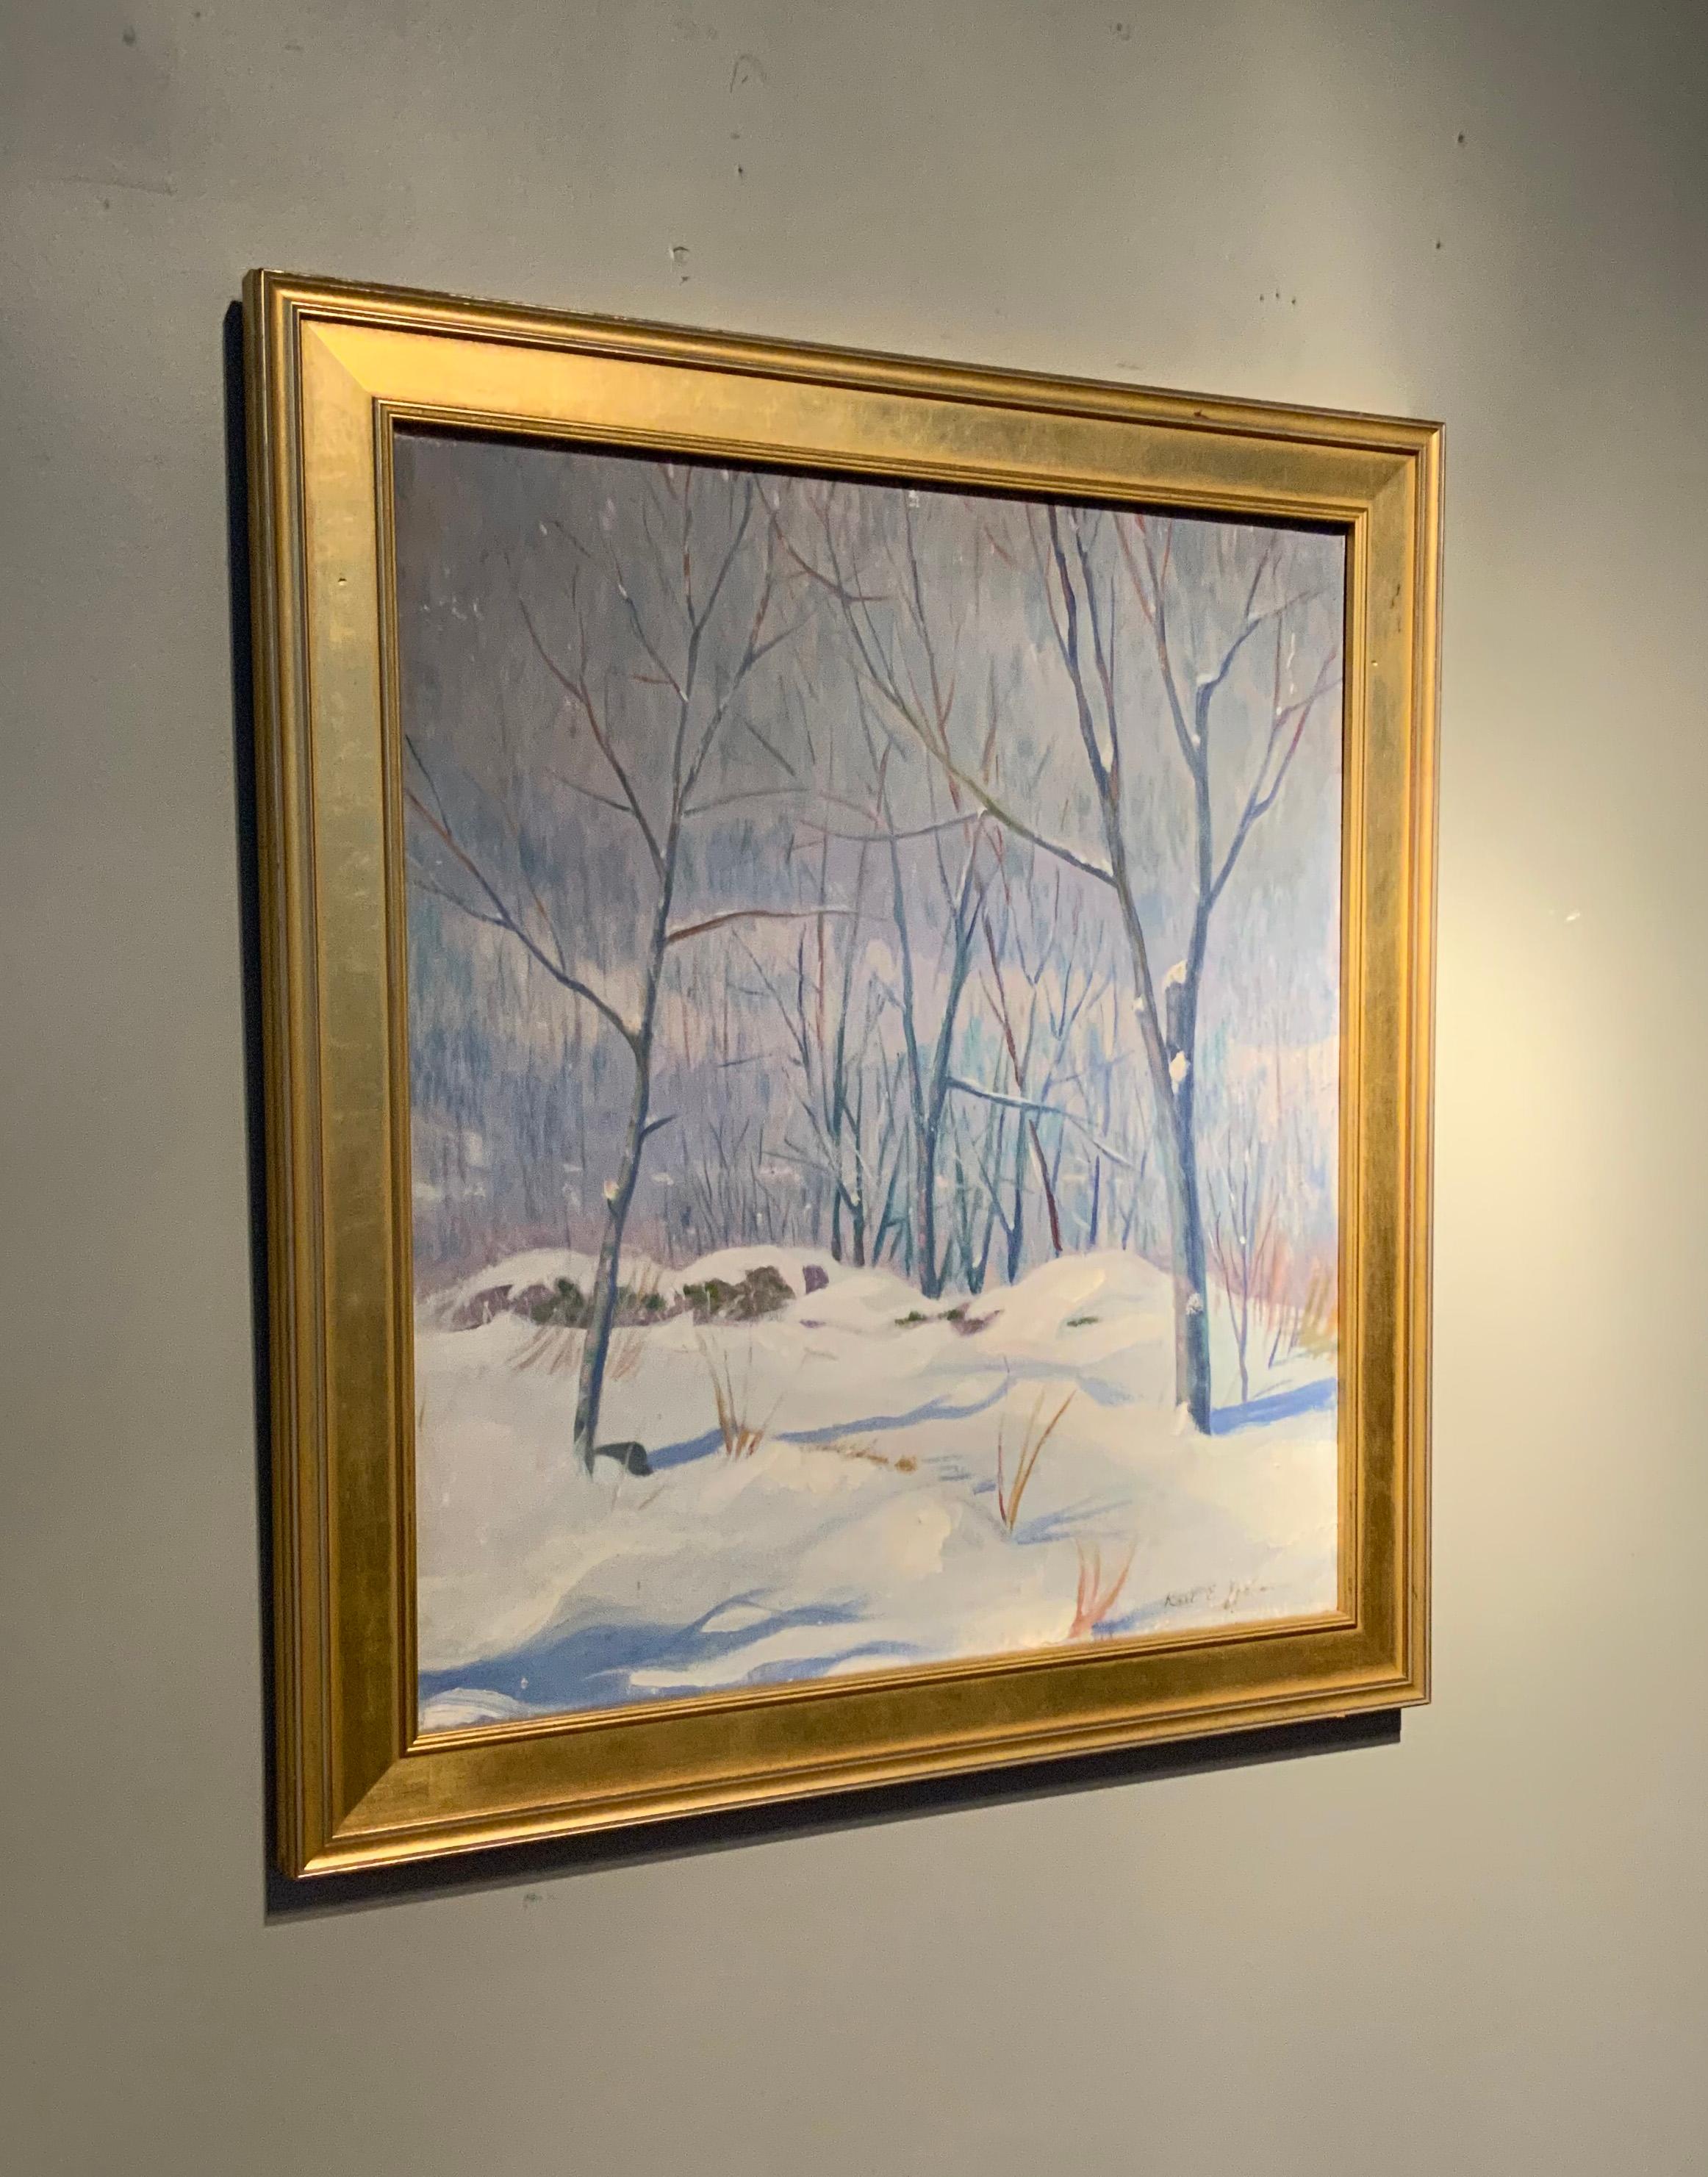 A lovely and beautiful 1940's oil on canvas painting of a winter scene. From a Newport, RI estate, this peaceful scene is nicely detailed and thoughtgul. In its original gold leaf frame. Signed Karl E. Johnson.